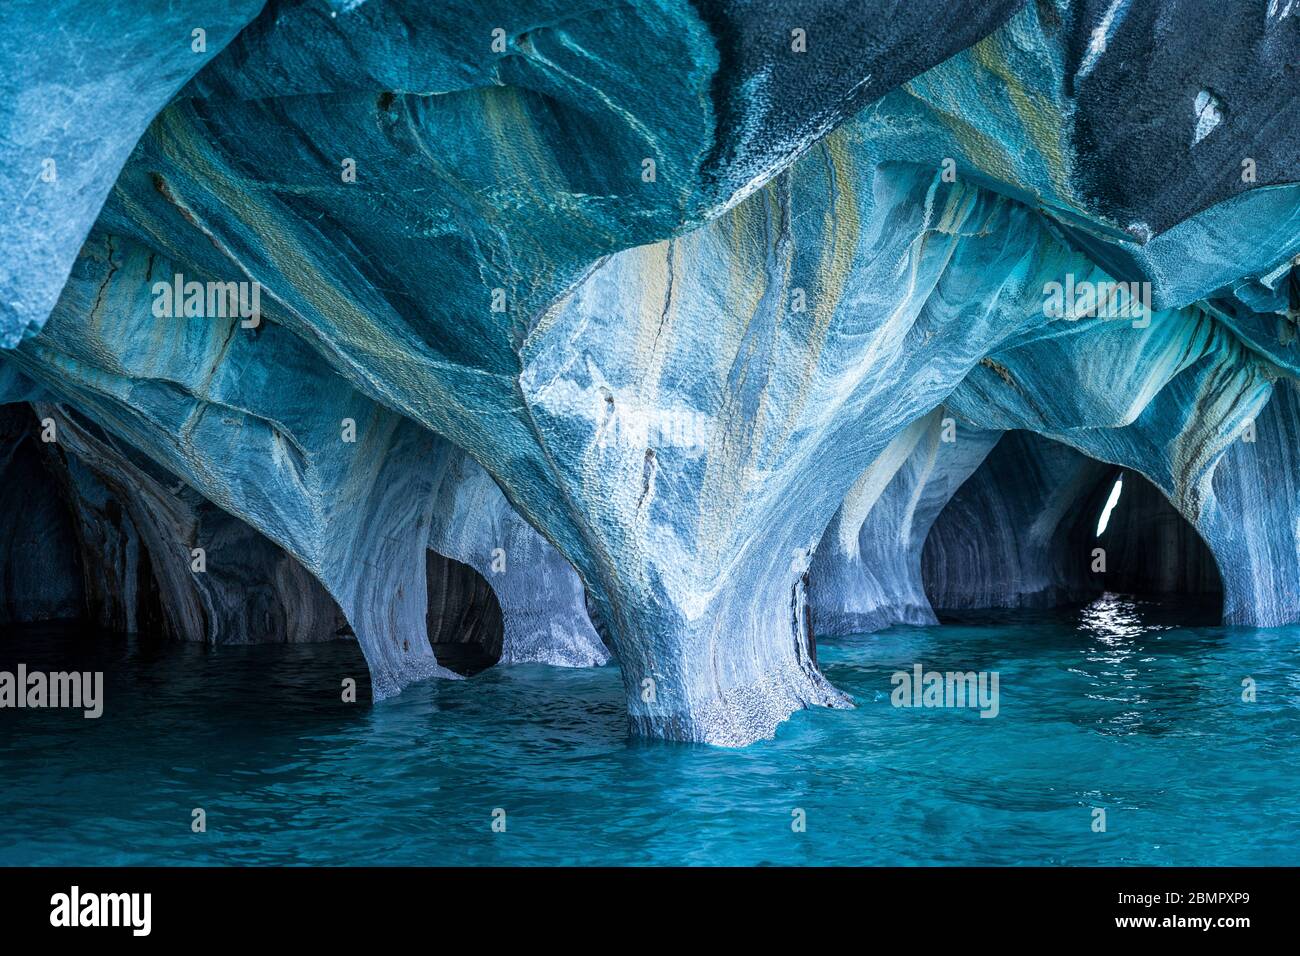 The Marble Caves Spanish Cuevas De Marmol A Series Of Naturally